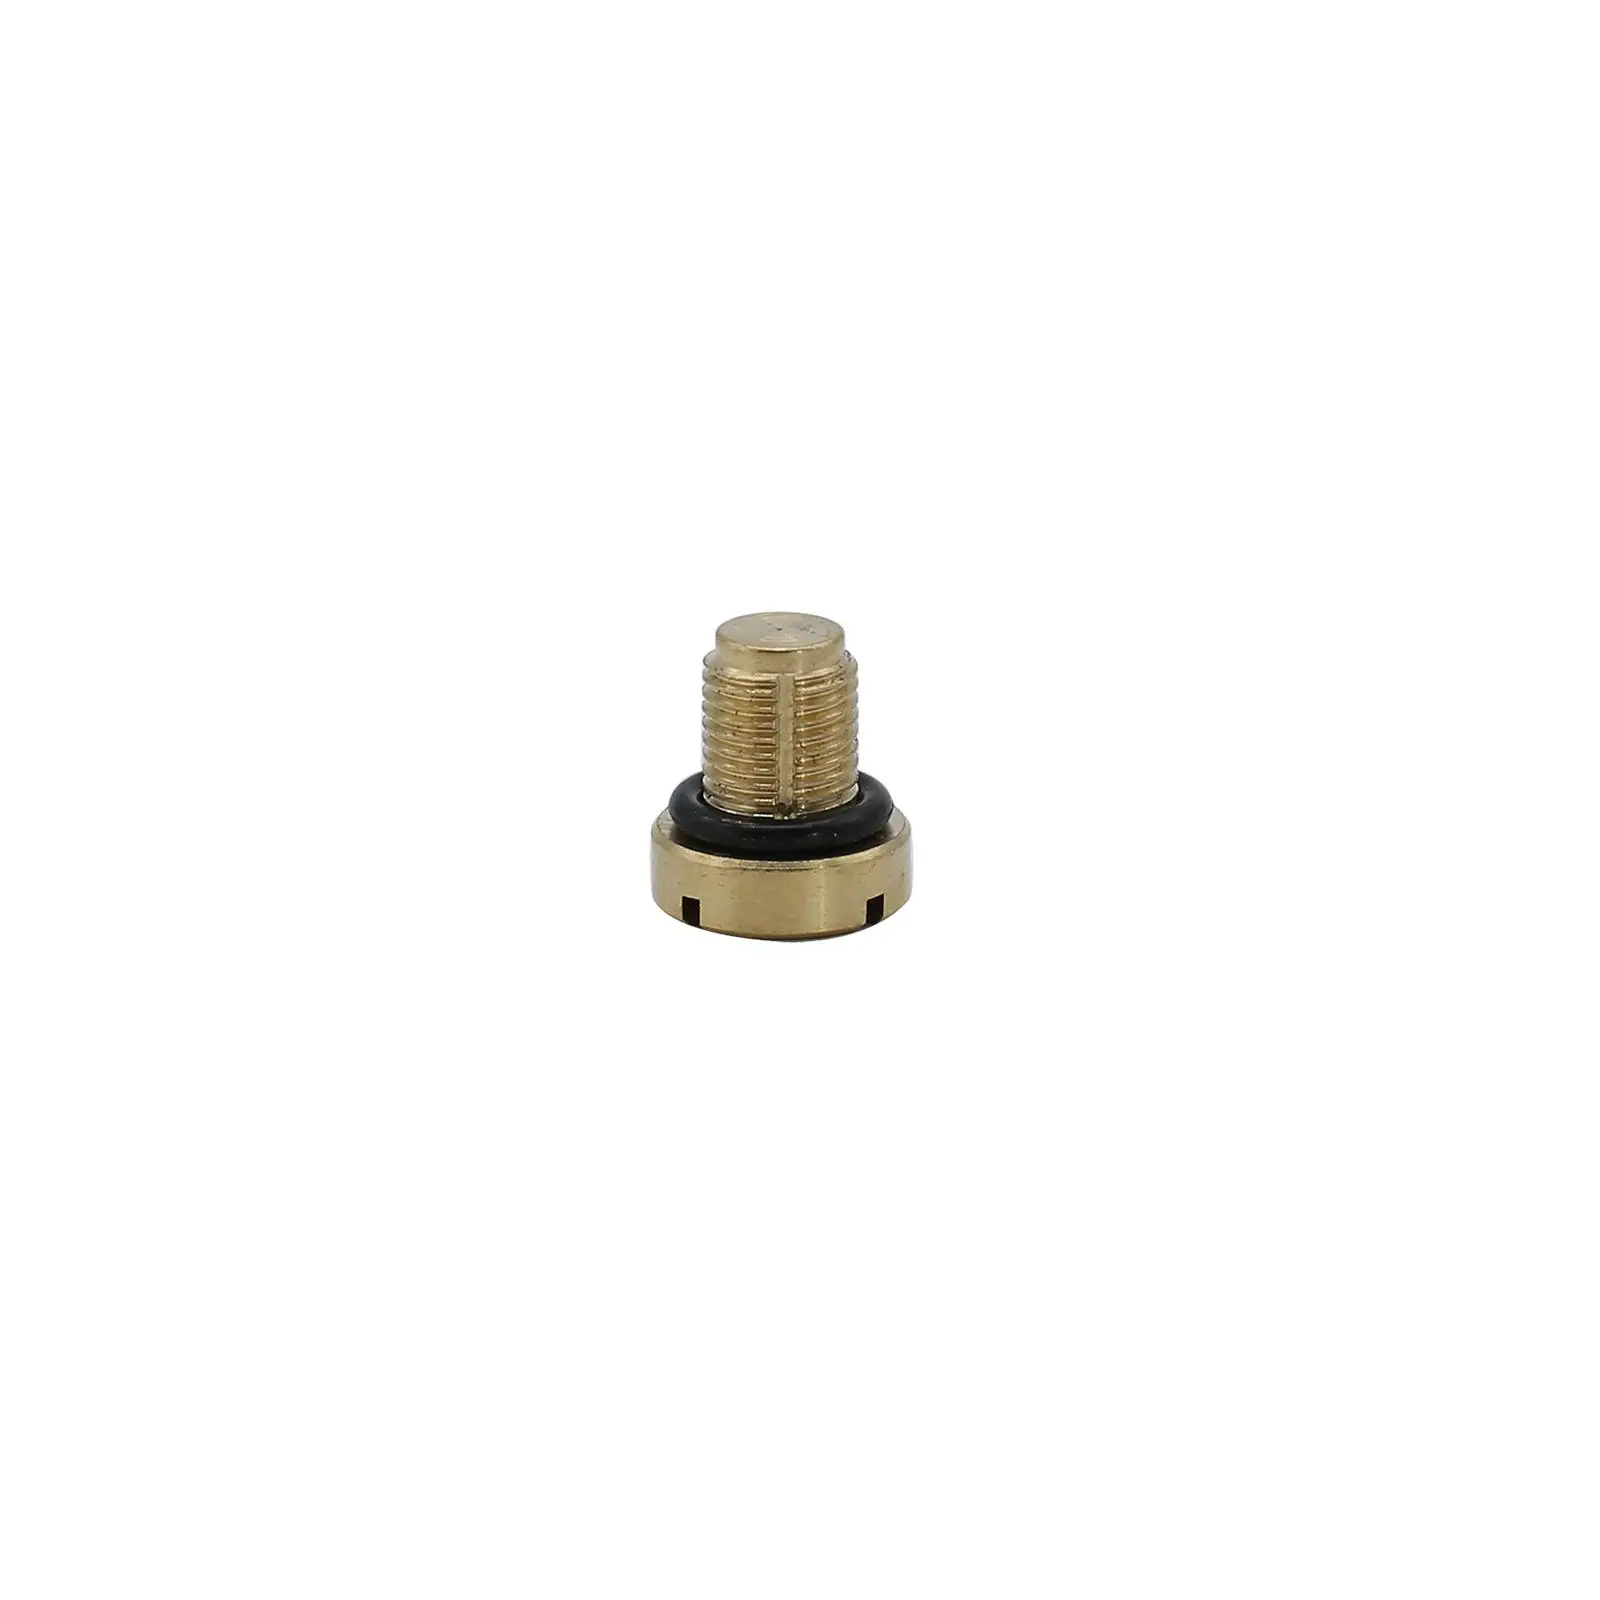 Expansion Tank Bleeder Screw for BMW E36 328IS 1996-1999 Replaces